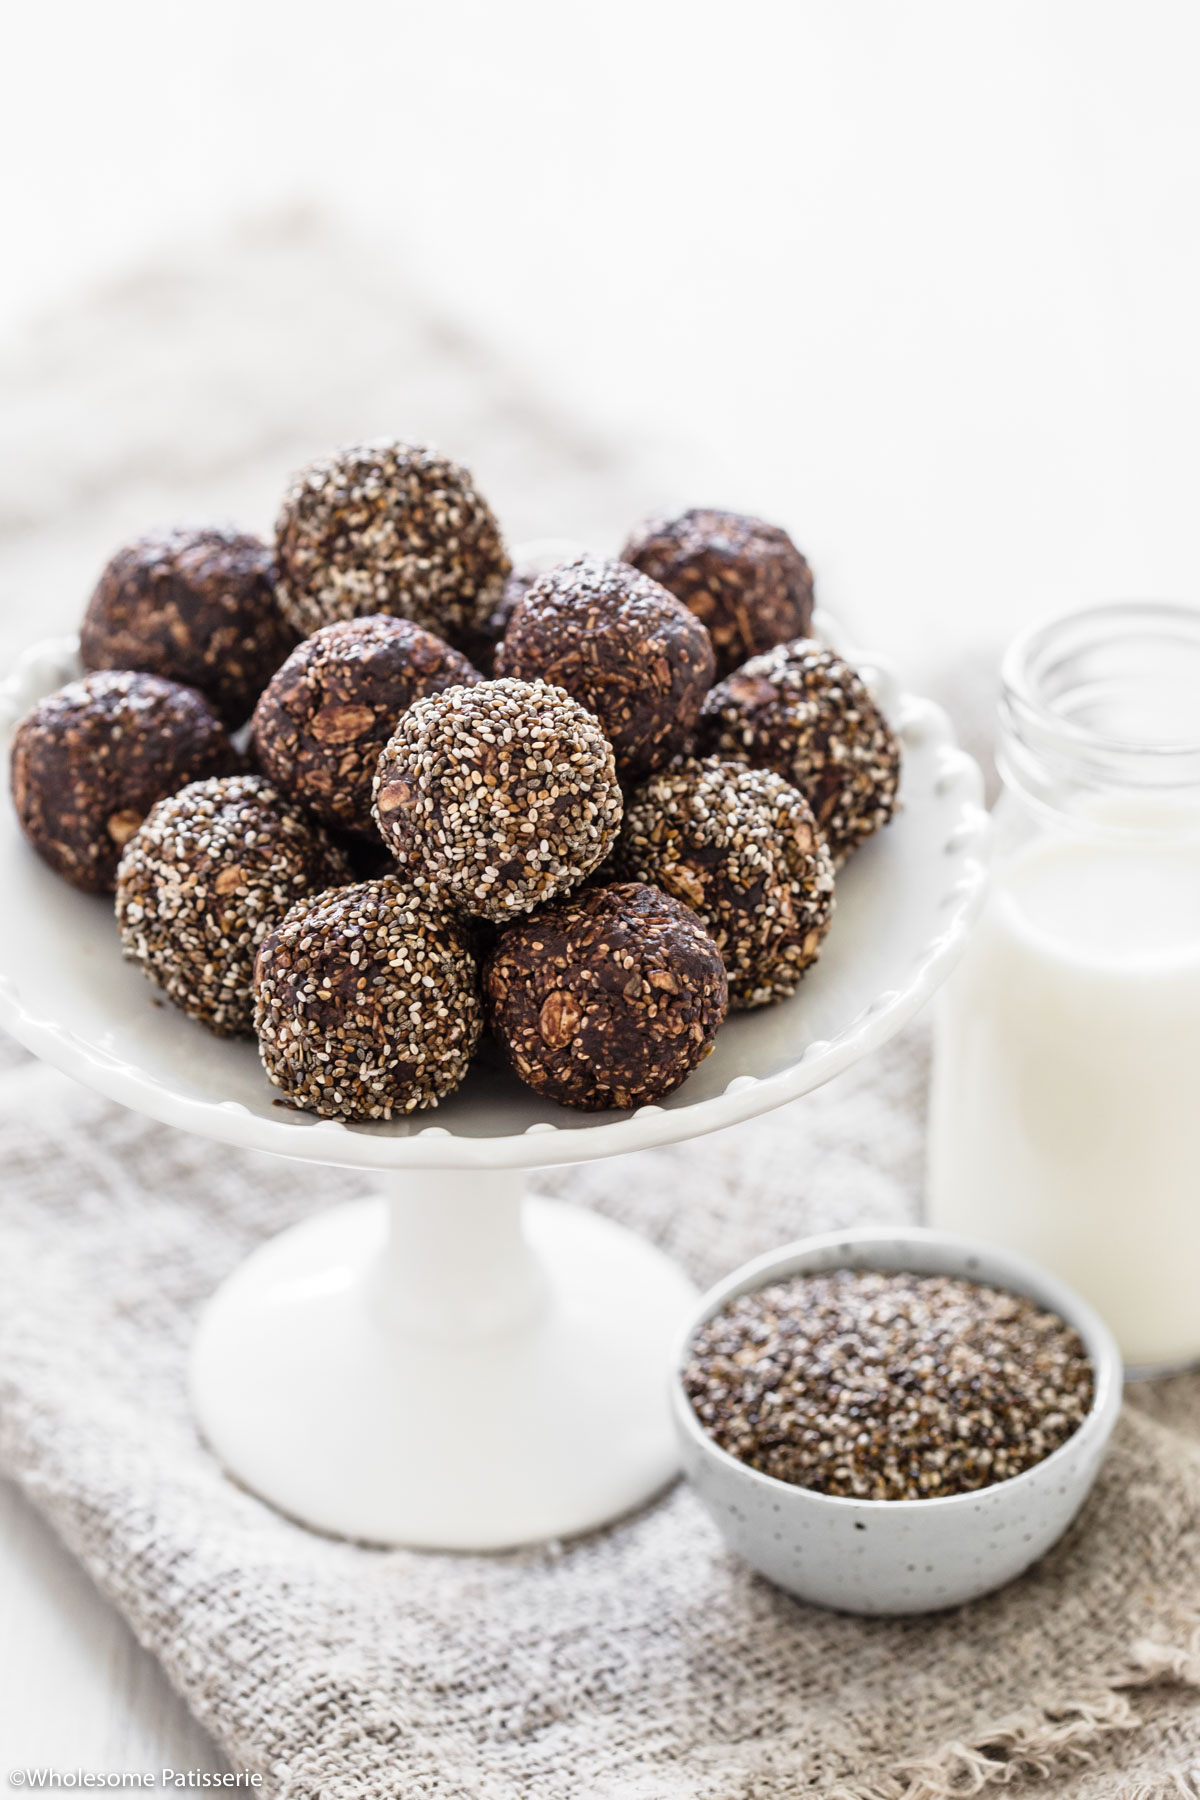 Date bliss balls together on white cake stand next to small bowl of chia seeds and a glass of milk.